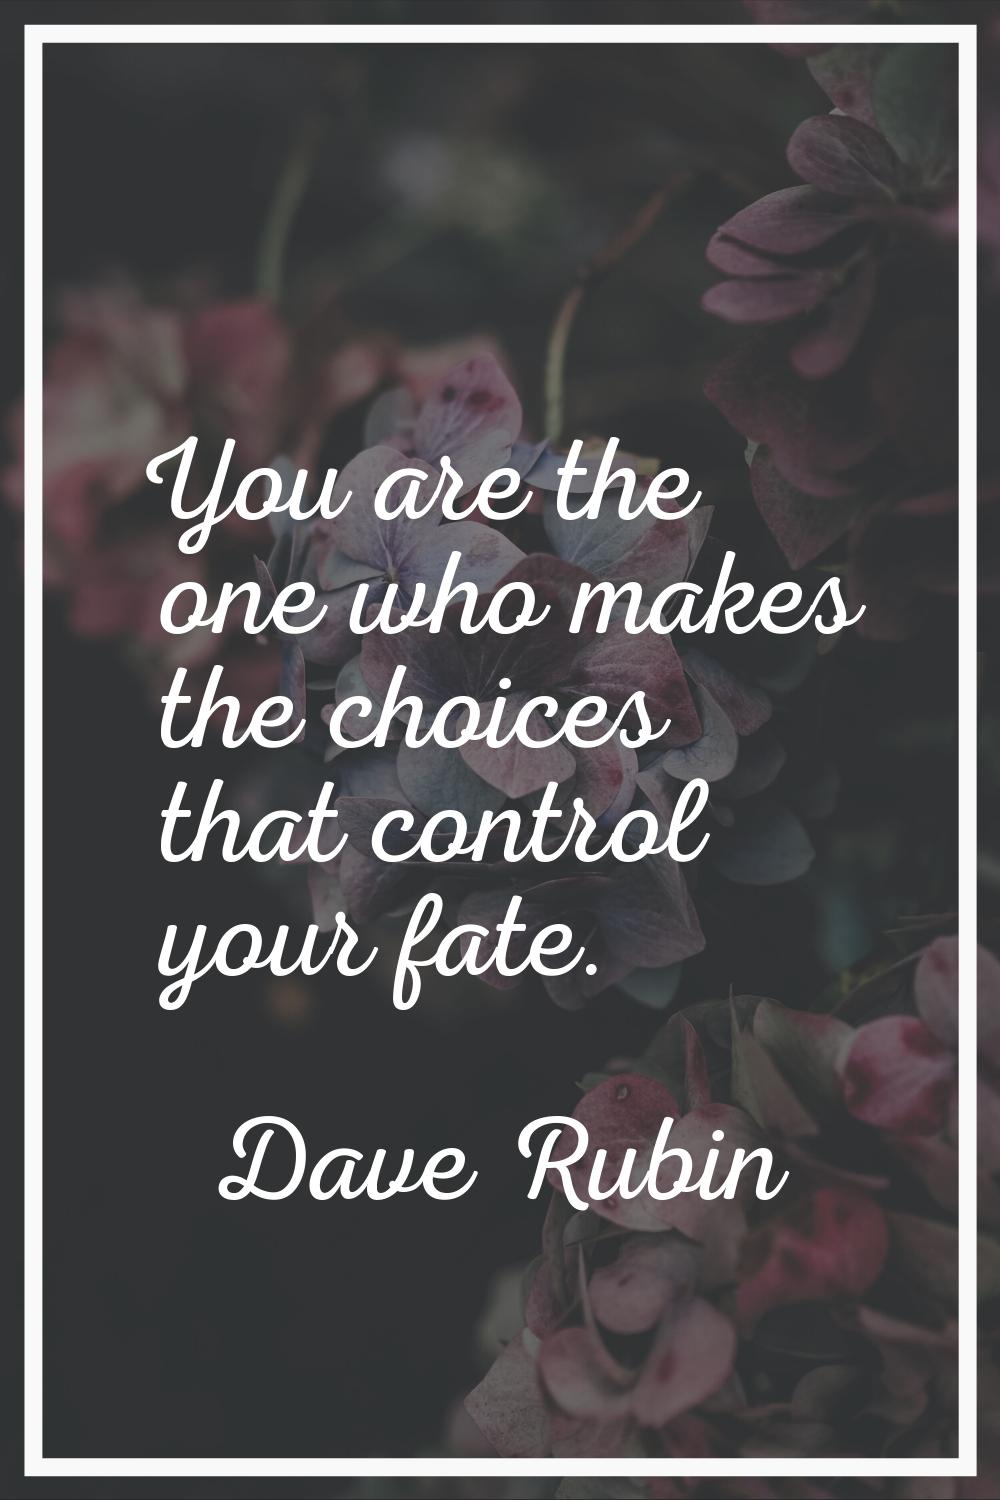 You are the one who makes the choices that control your fate.